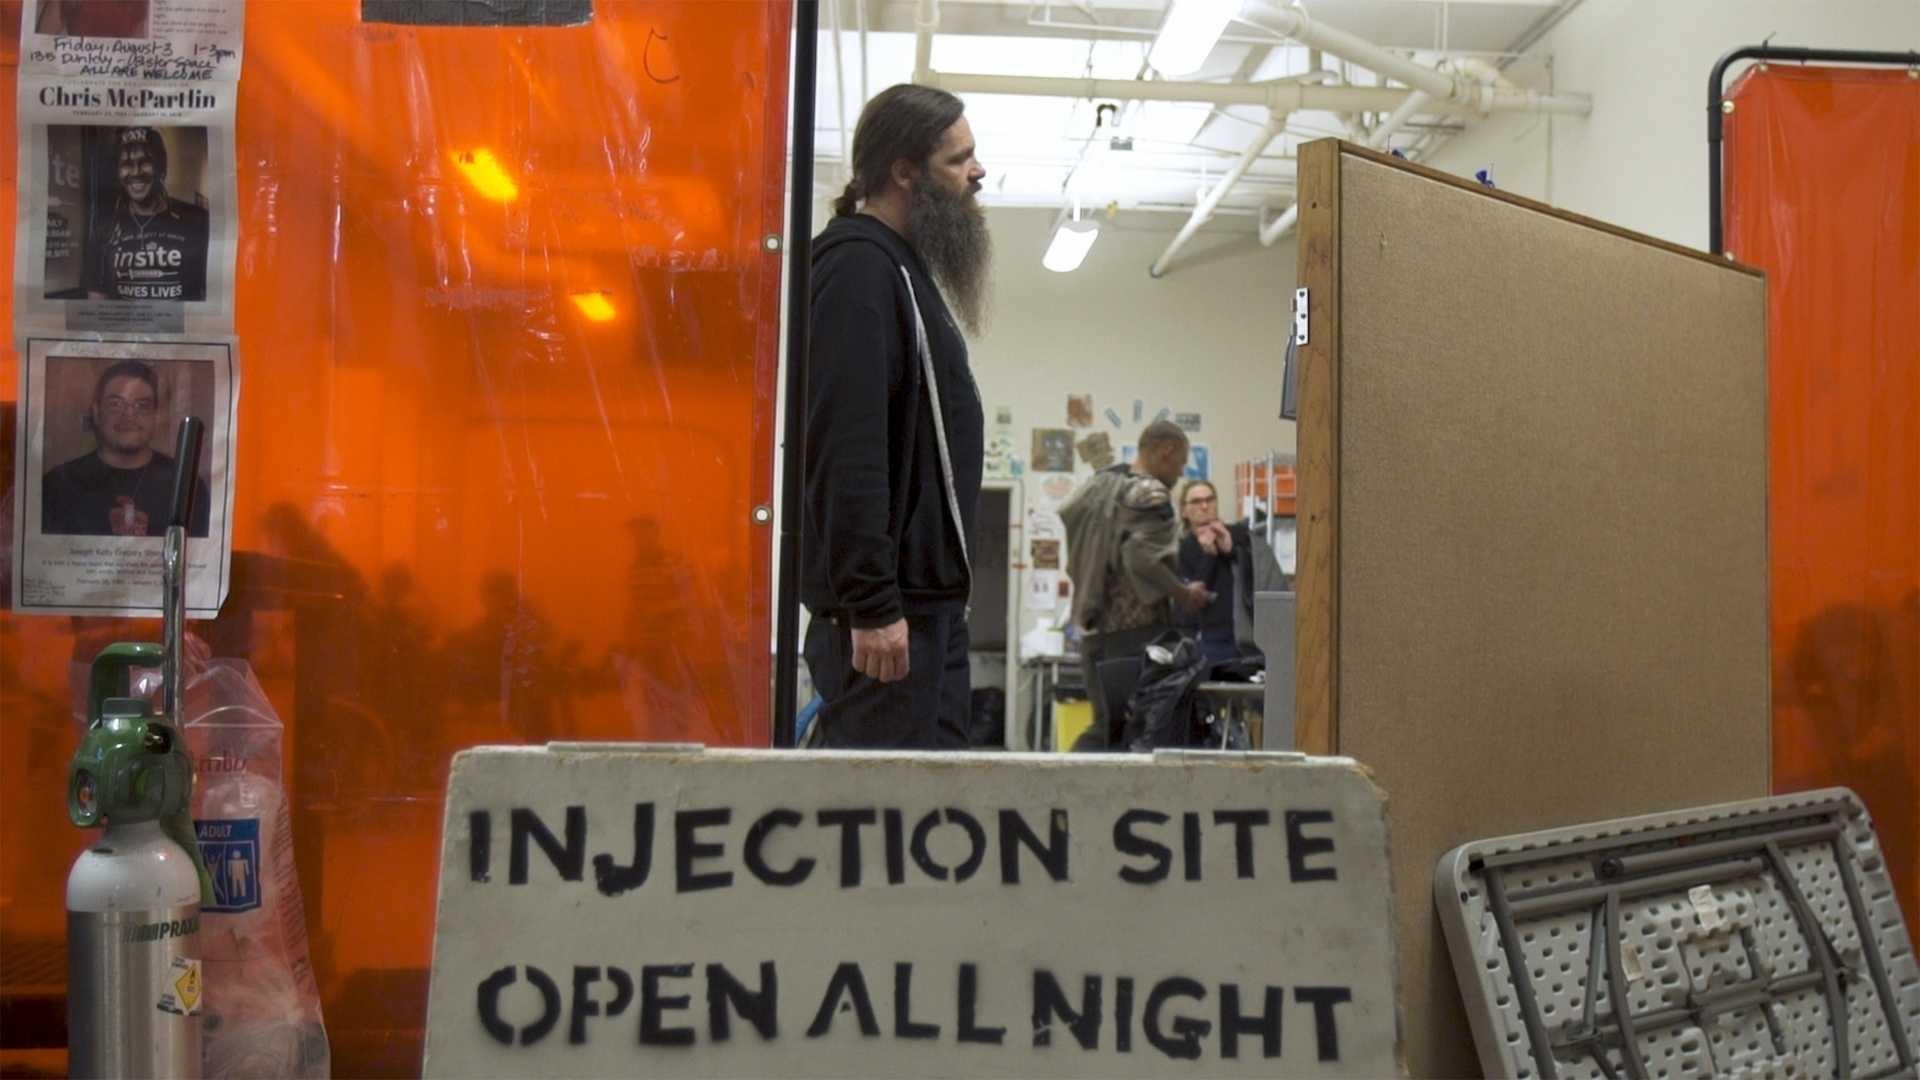 A man stands behind a sign that reads "Injection Site Open All Night"